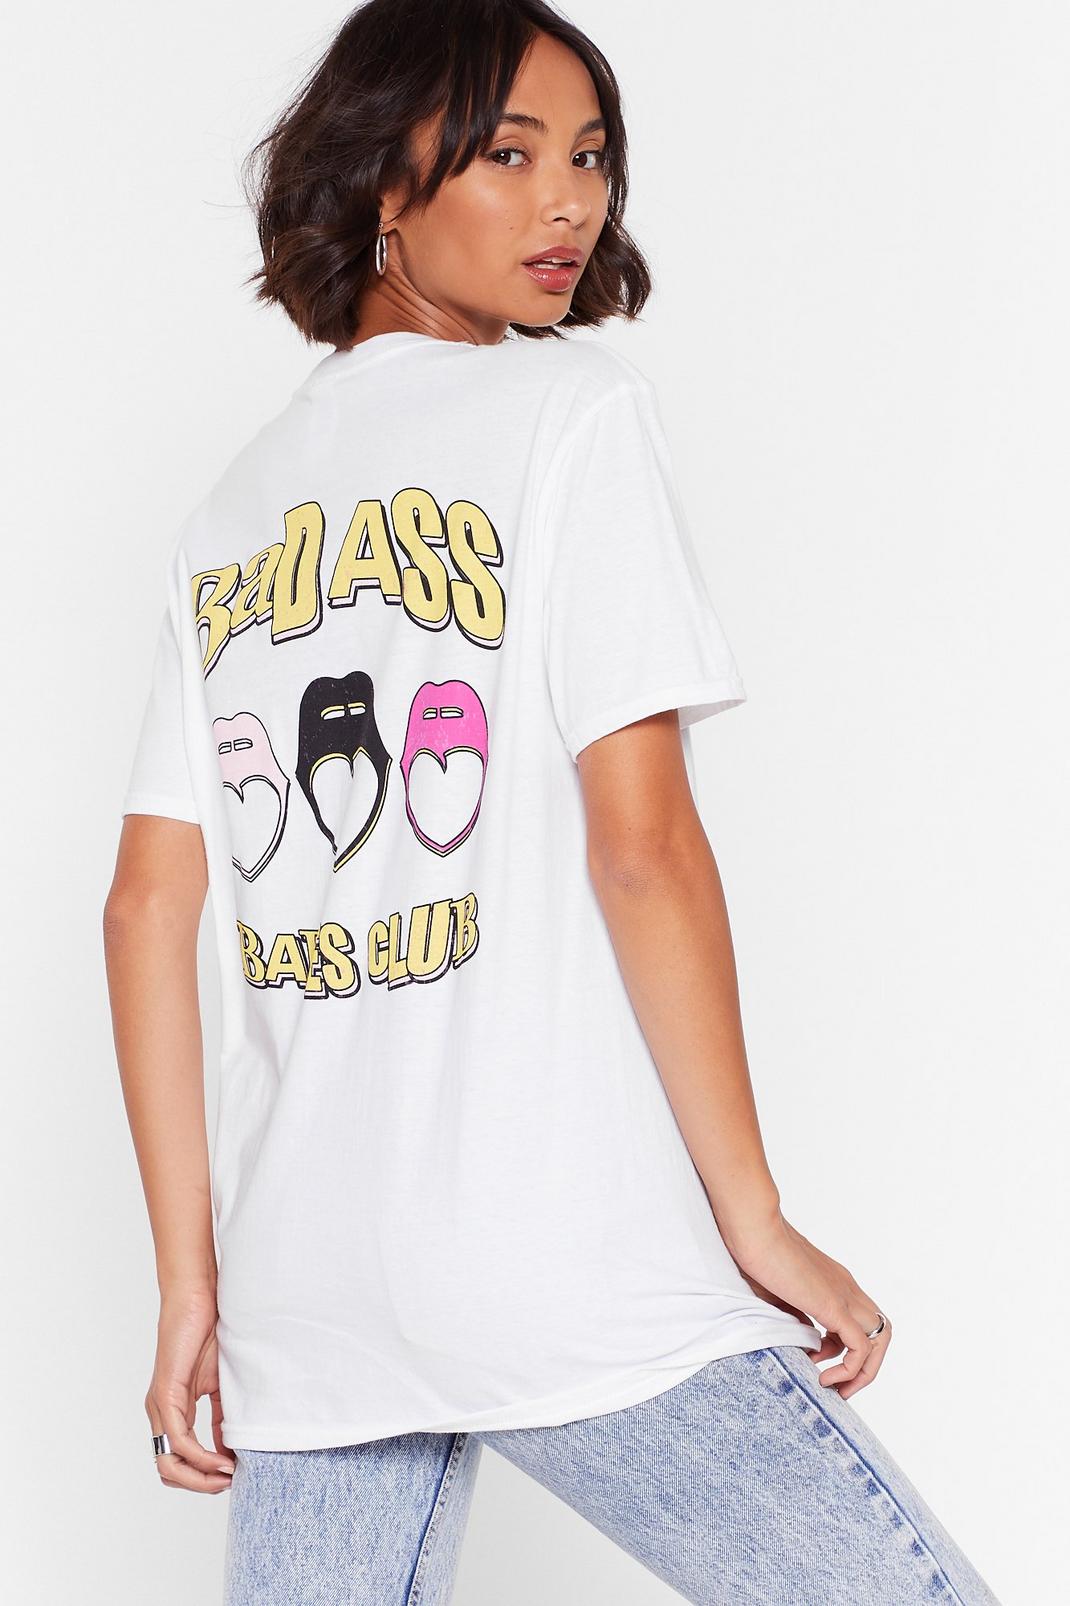 Badass Babes Club Relaxed Graphic Tee image number 1